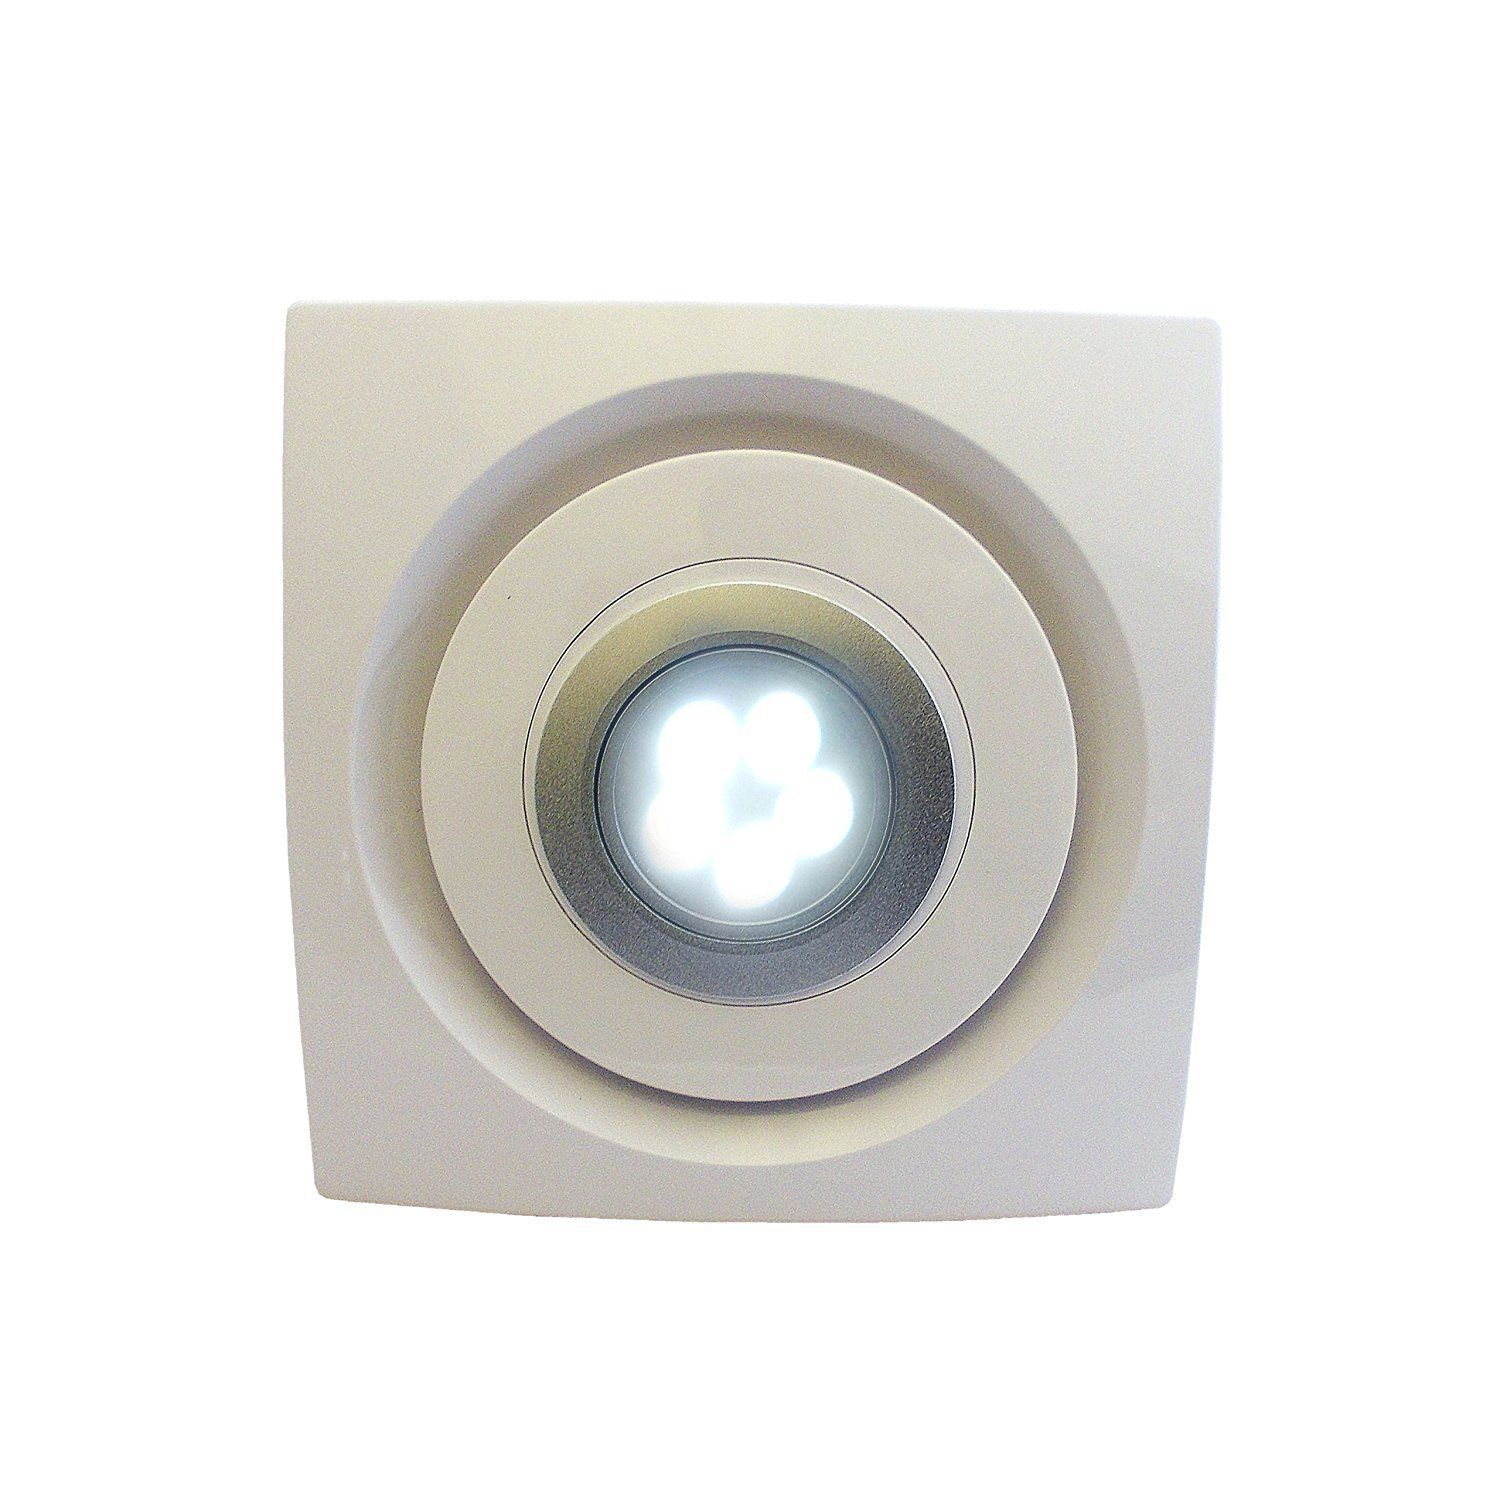 Bathroom Kitchen Ceiling Extractor Fan With Led Light 100mm 4 pertaining to dimensions 1500 X 1500